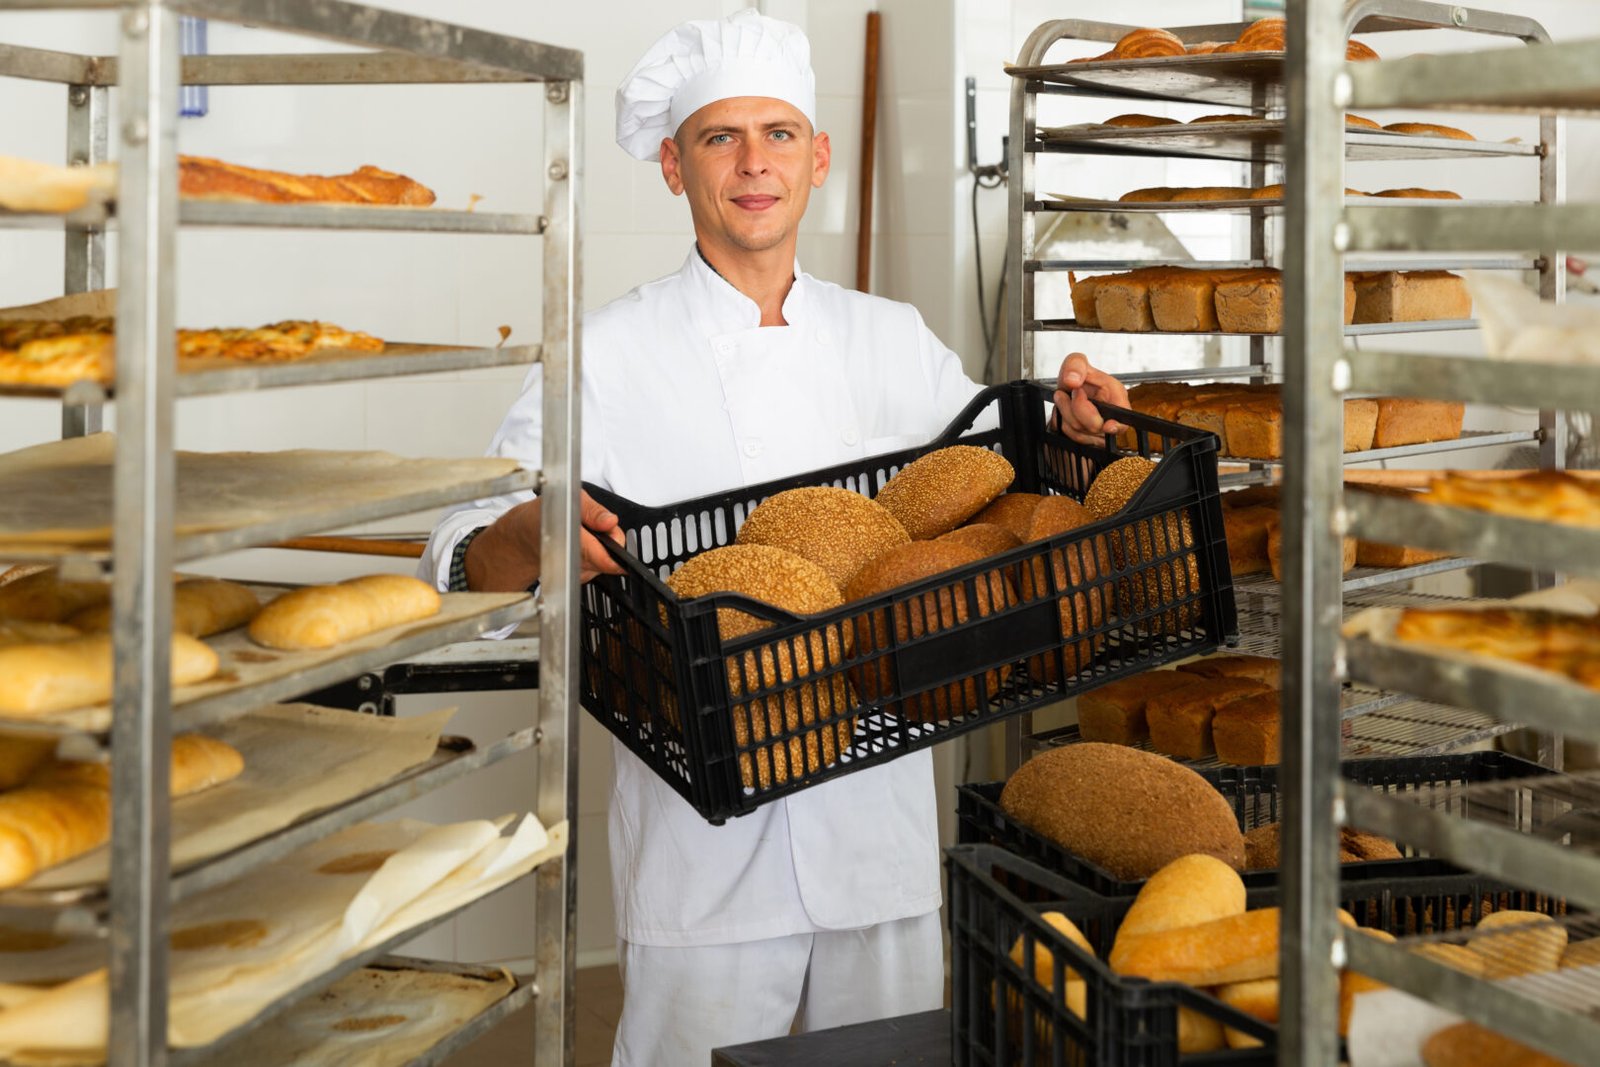 A professional bake holds a tray of breads produced with Keto PowerFlax Baking Mix, in a commercial bakery.